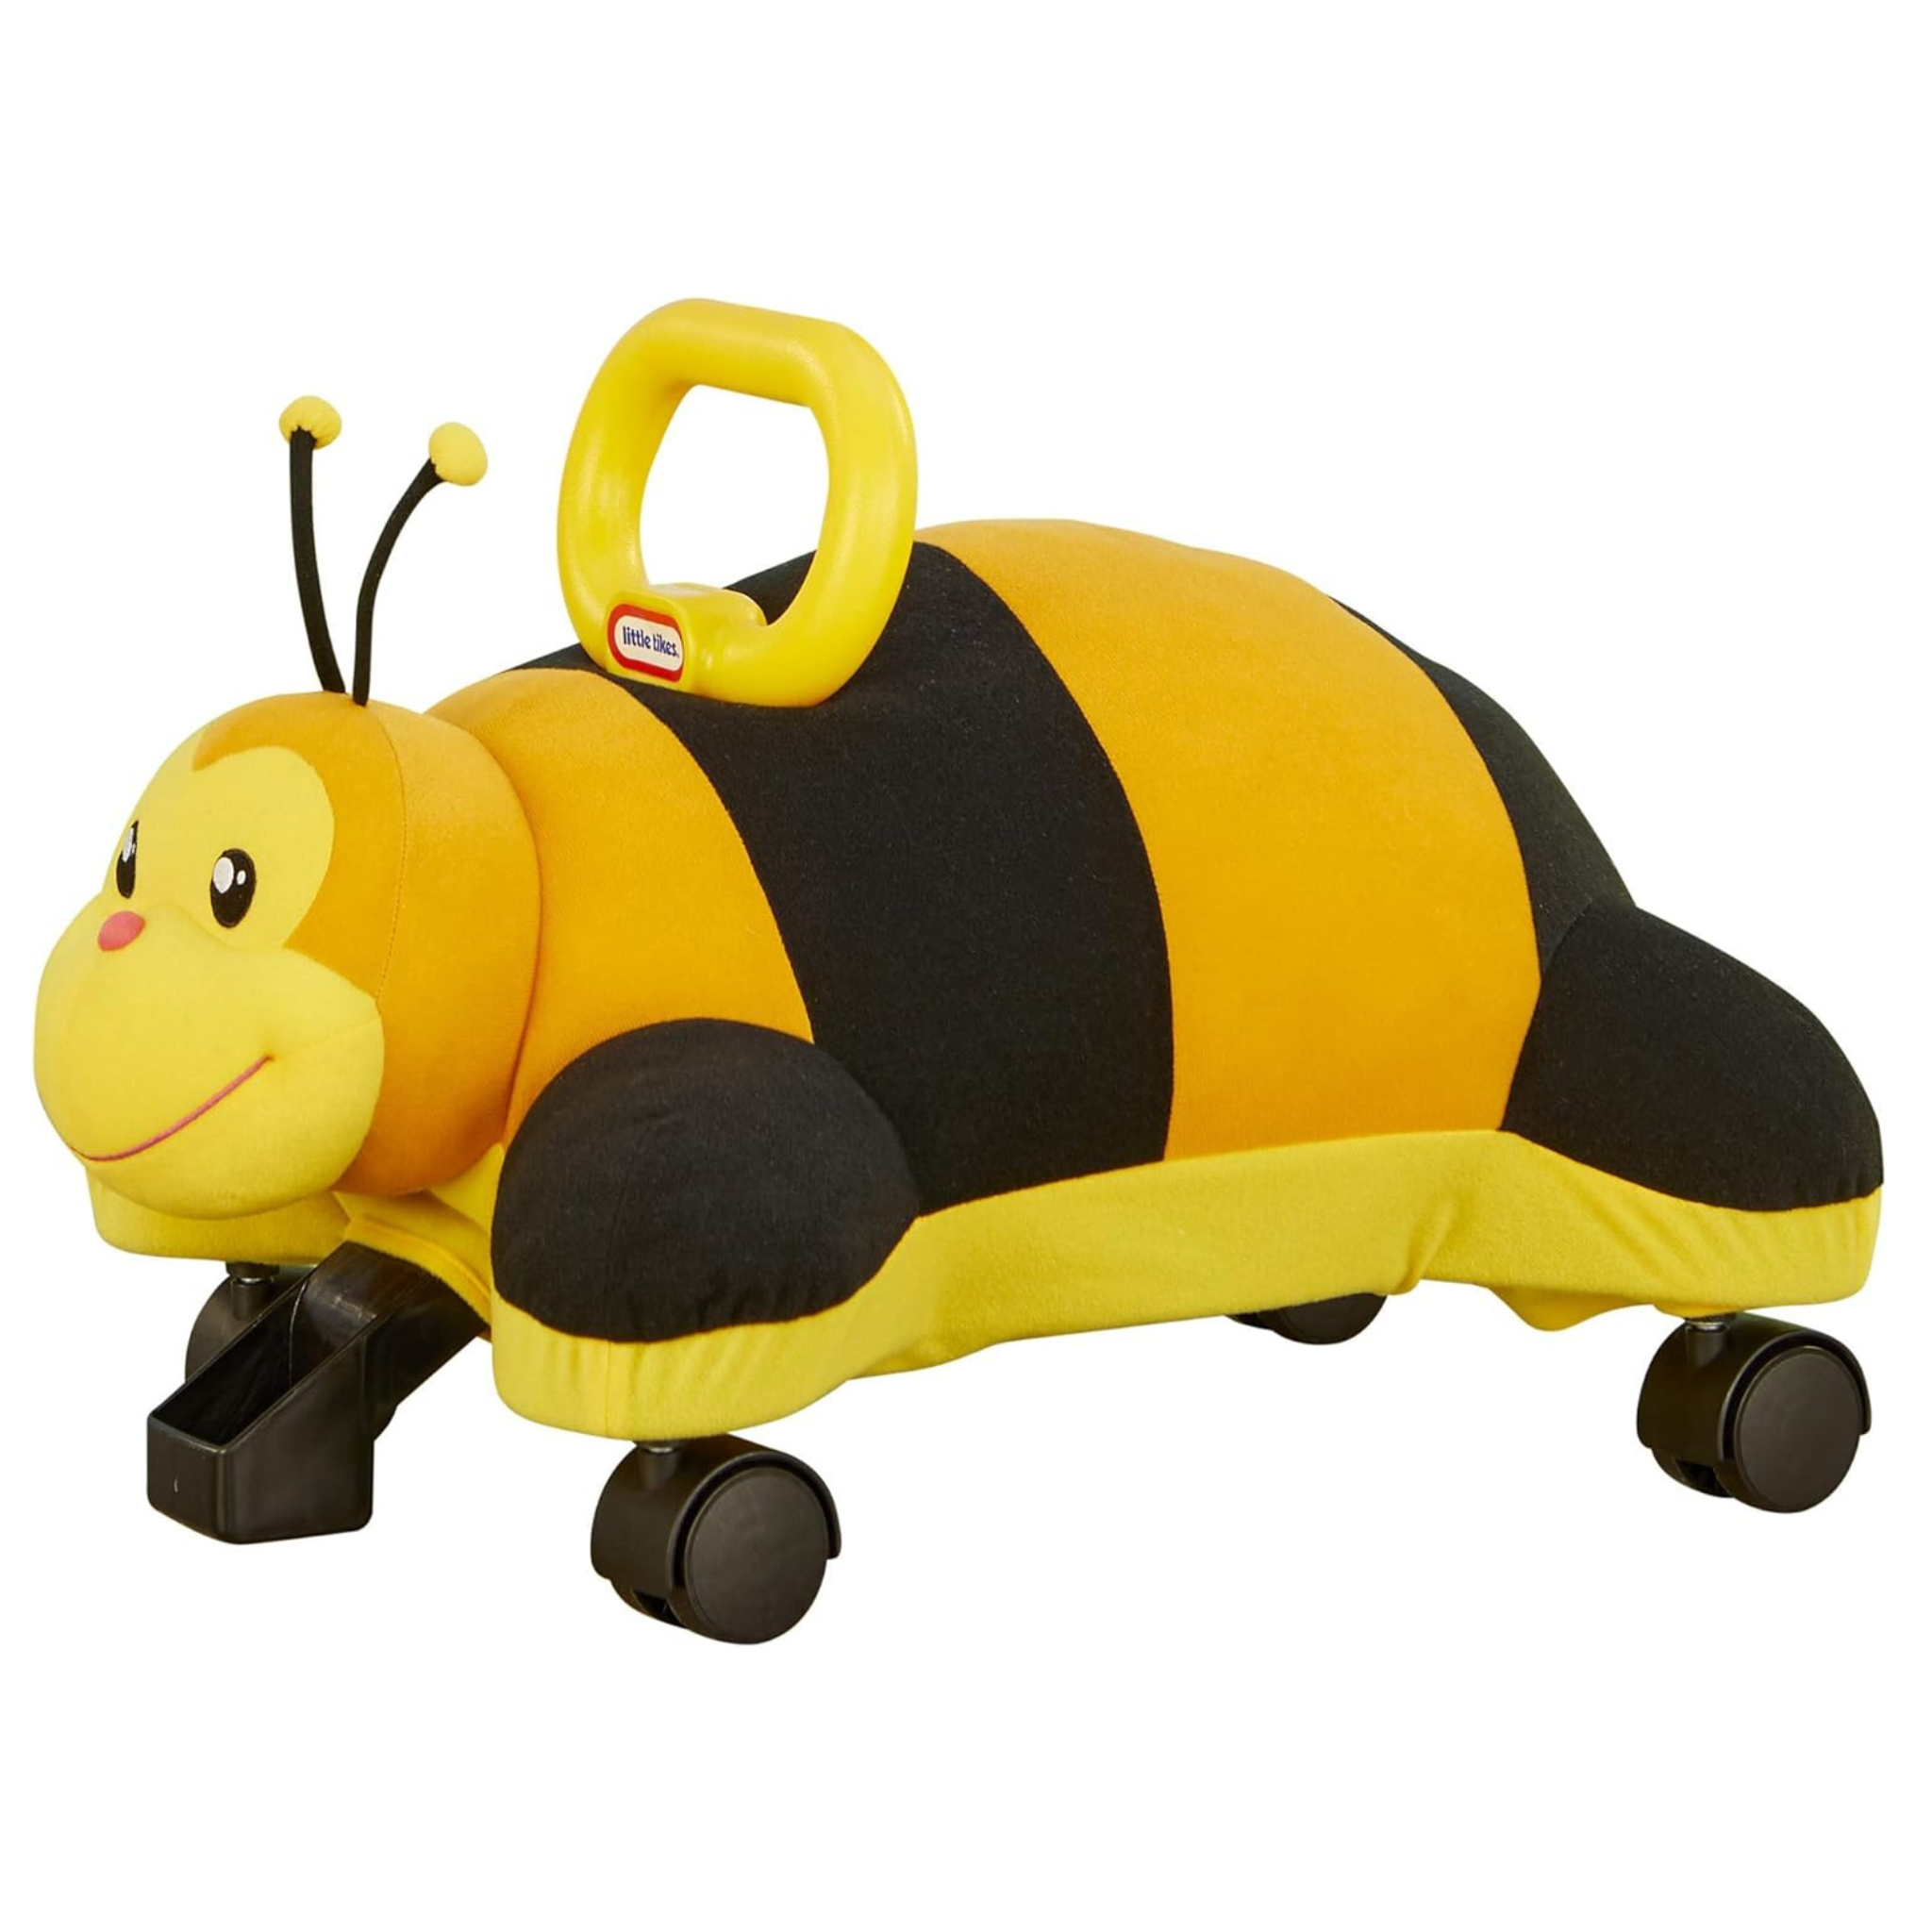 Little Tikes Bee Pillow Racer Soft Plush Ride-On Toy